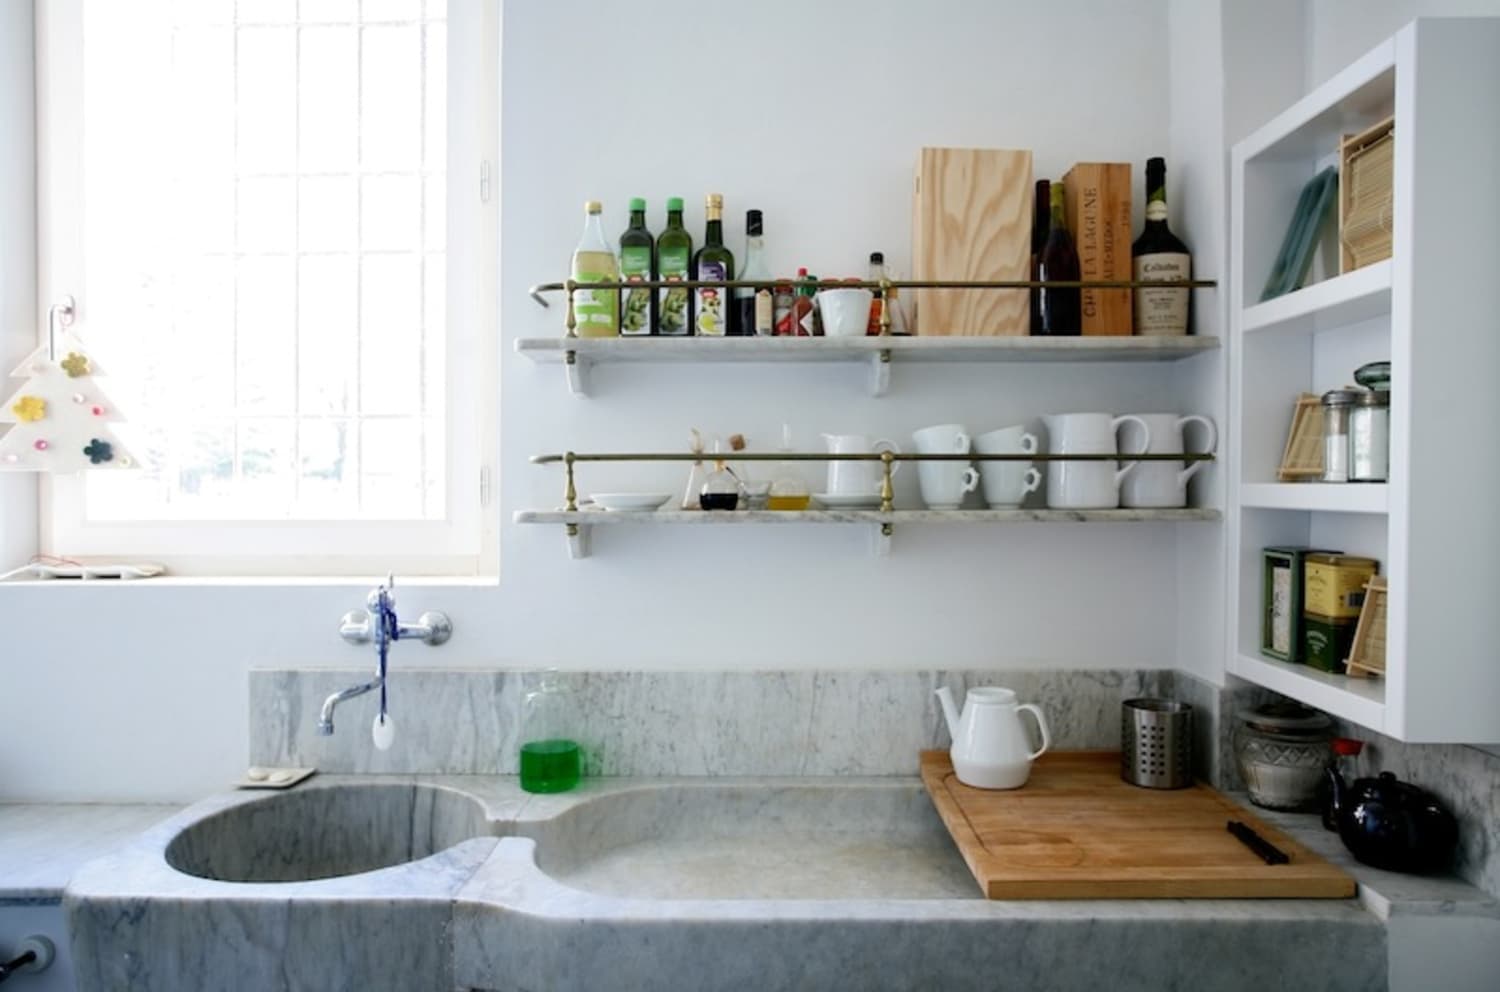 This Budget-Friendly, Small Detail Can Make a Kitchen, Bathroom, or Powder Room a Little Fancier